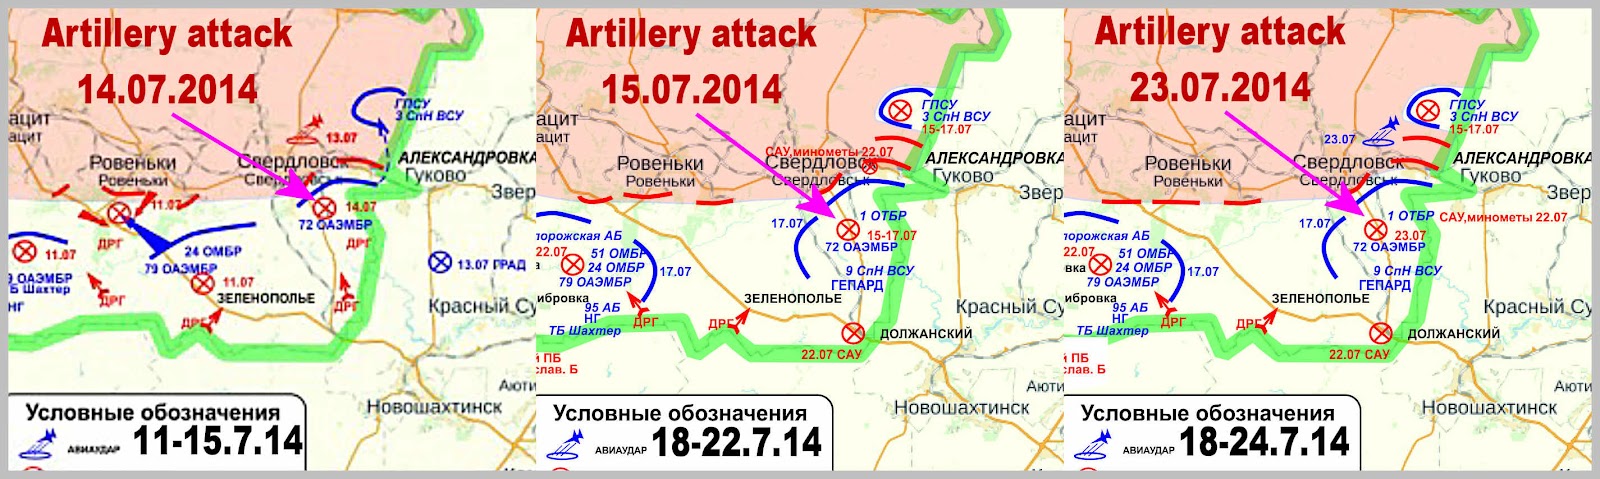 attles southeast of Sverdlovsk from 11 to 24 July 2014 (map from pro-russian sites)